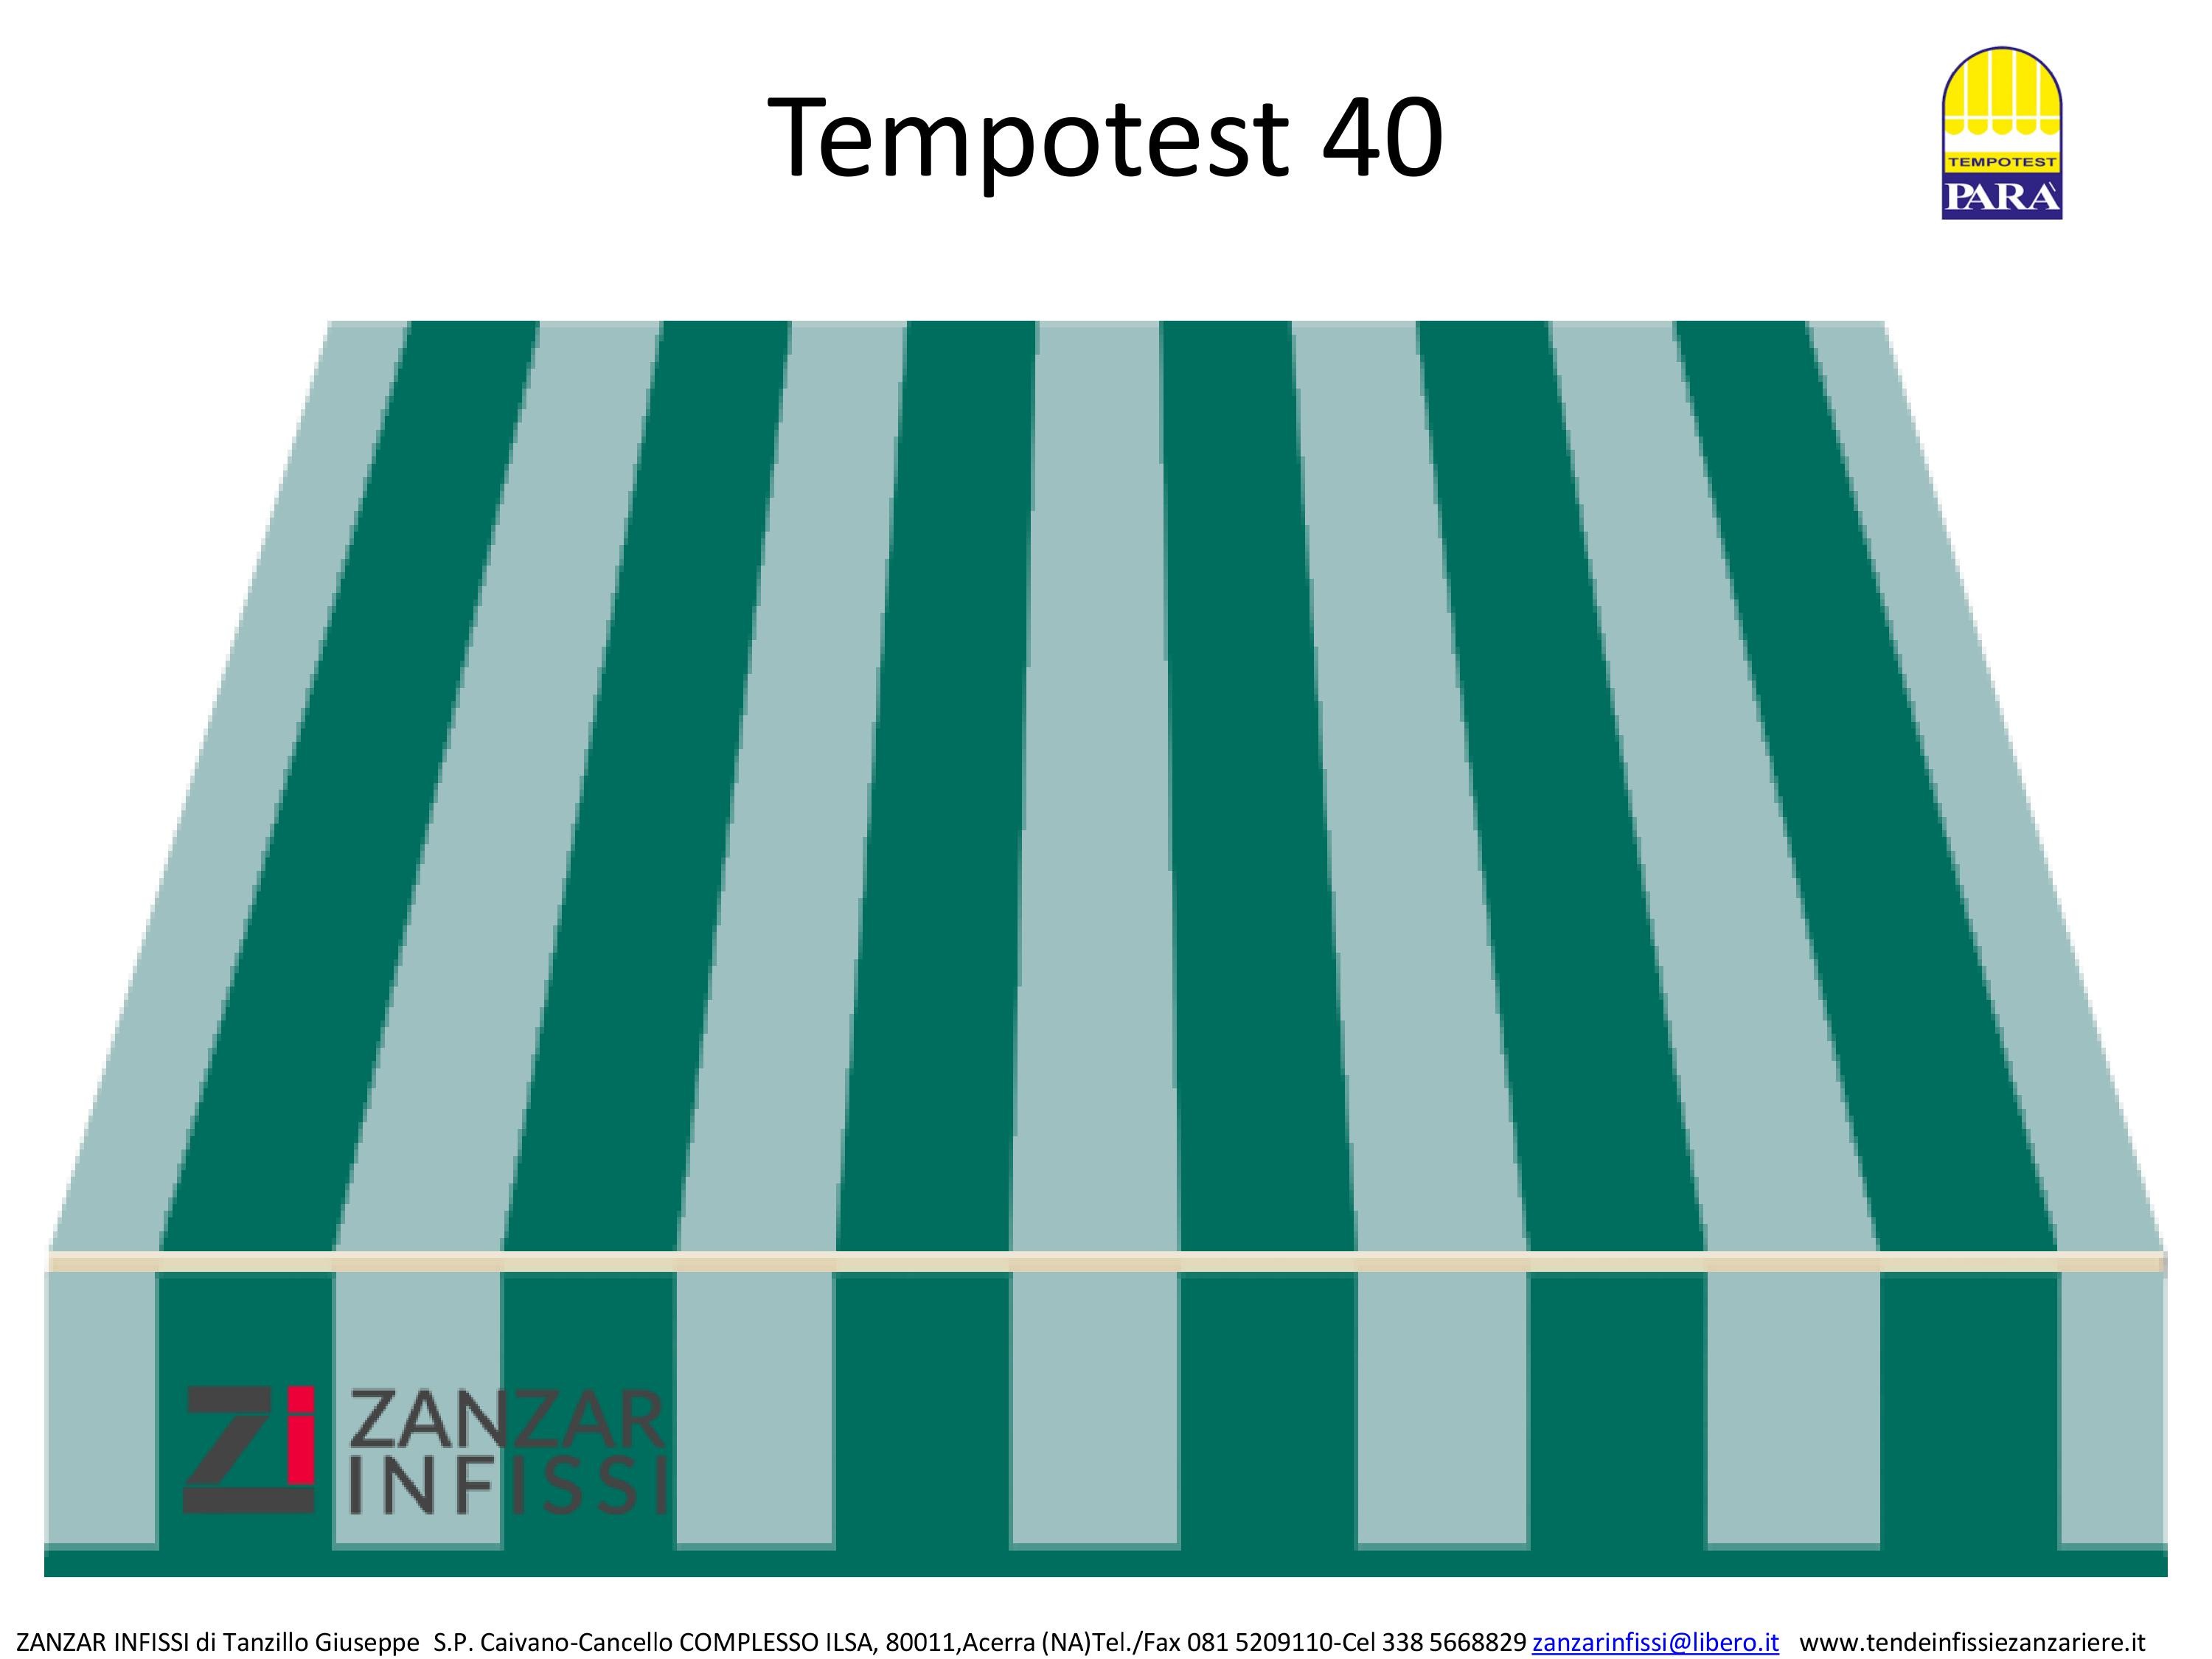 Tempotest 40